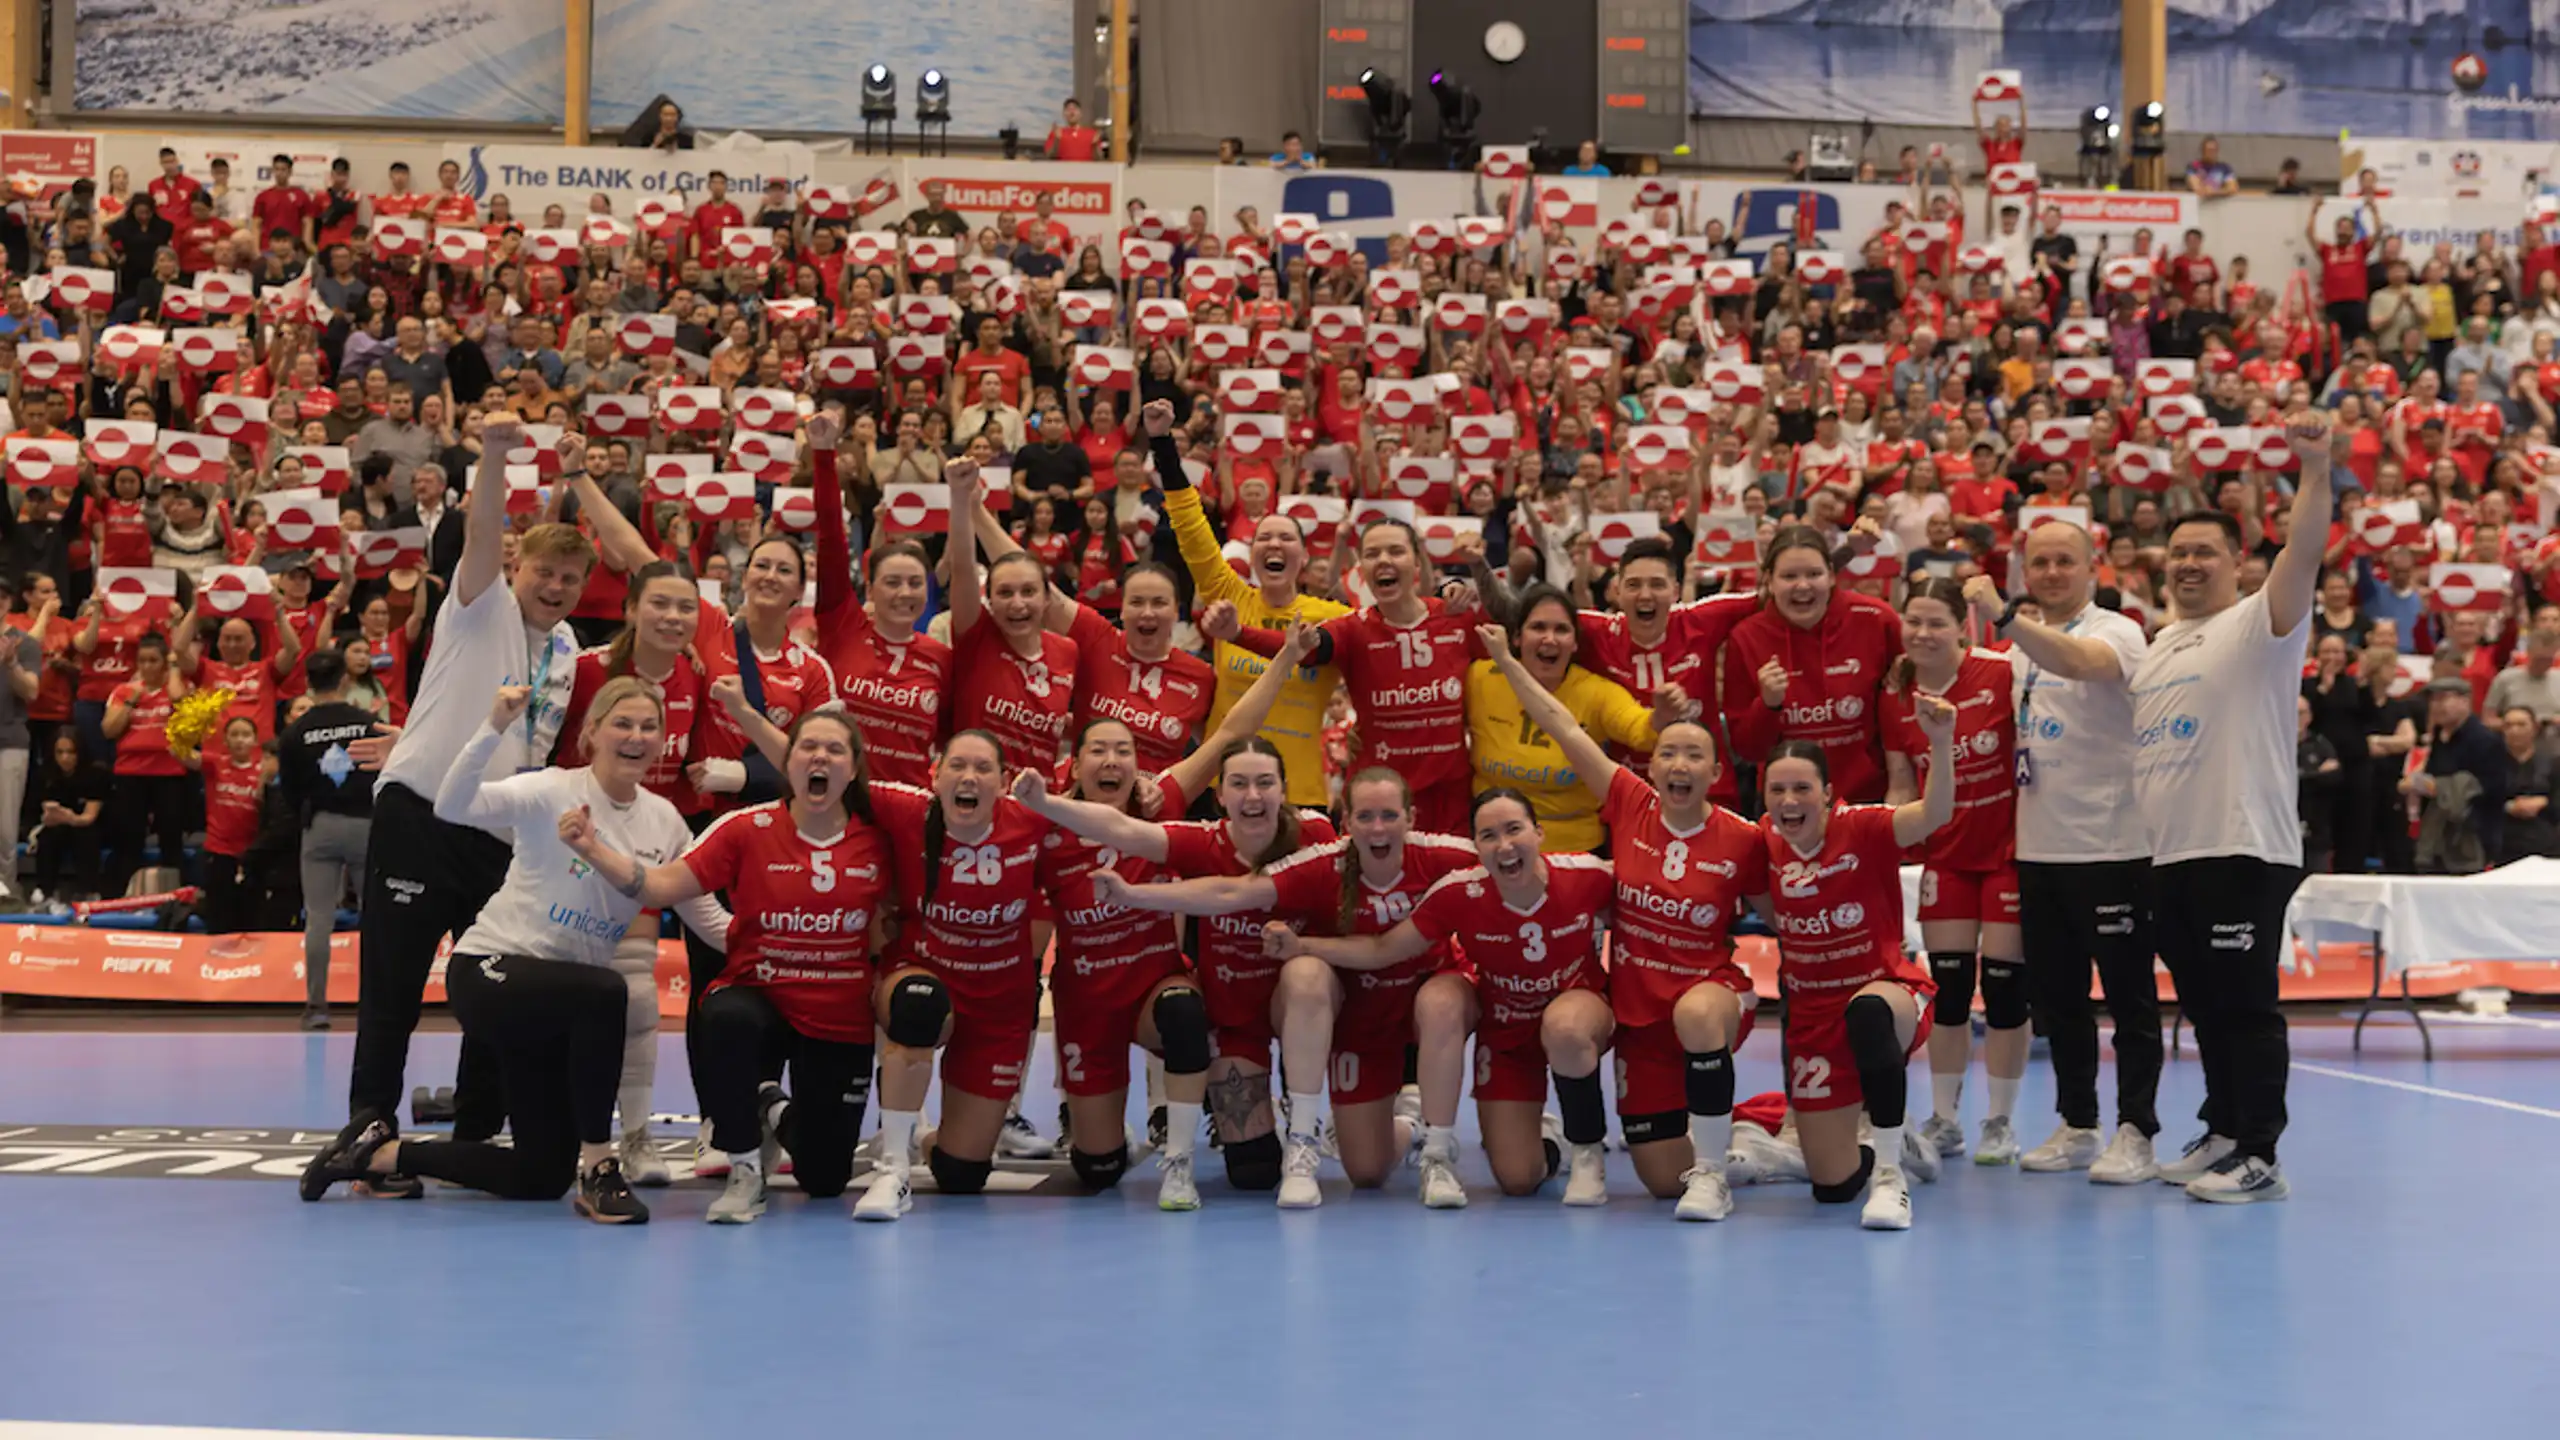 The national team qualified to the World cup 2023. Photo: Lars Kleemann Andersen